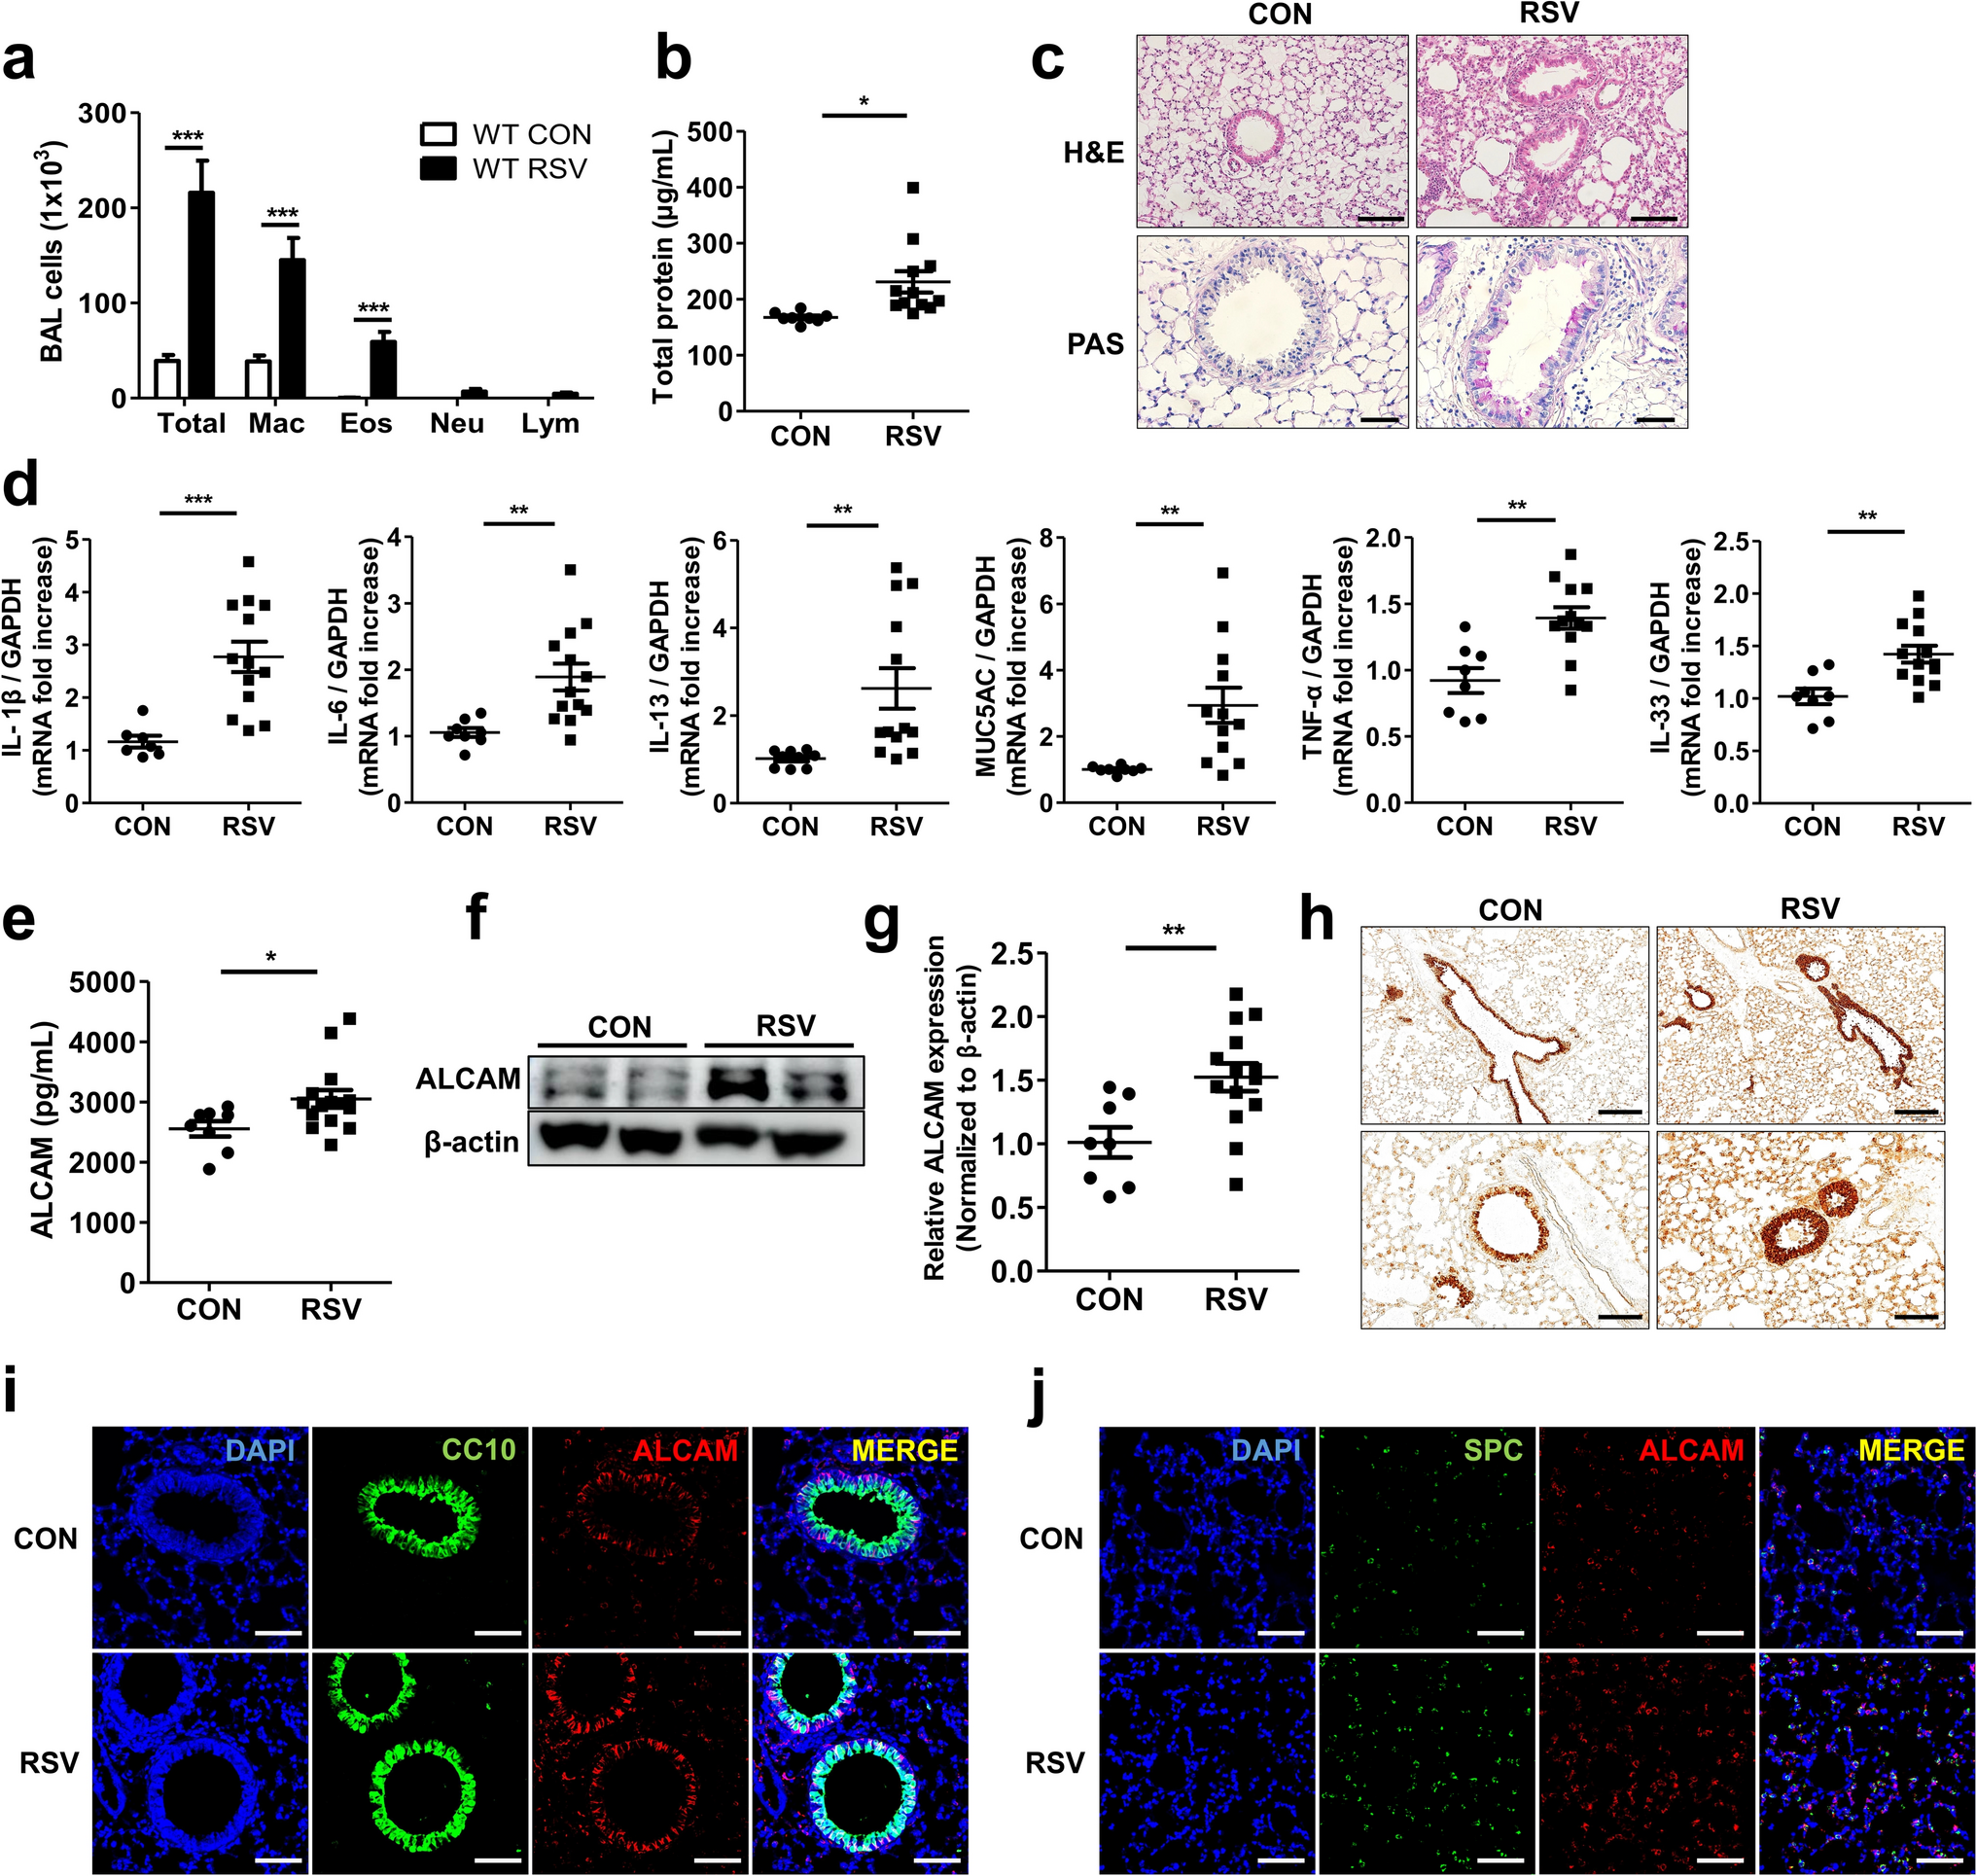 Activated Leukocyte Cell Adhesion Molecule Regulates the Expression of Interleukin-33 in RSV Induced Airway Inflammation by Regulating MAPK Signaling Pathways